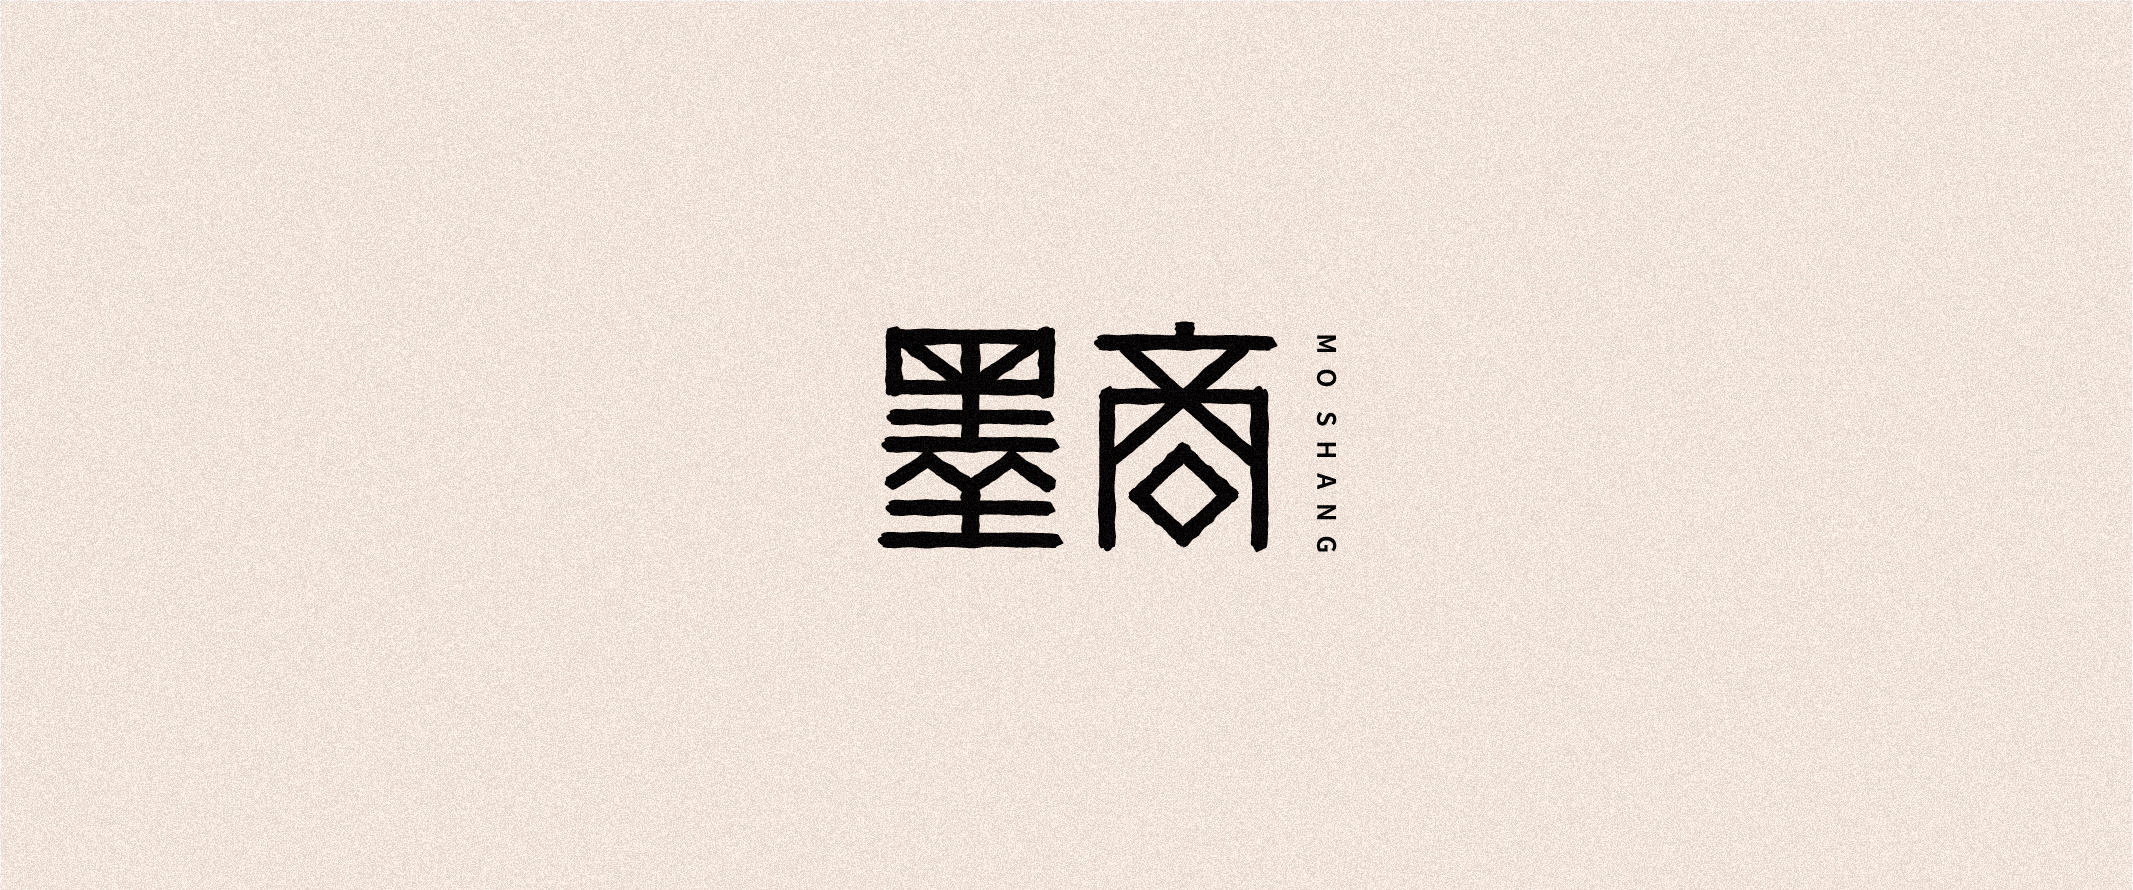 33P Chinese font design collection inspiration #.119